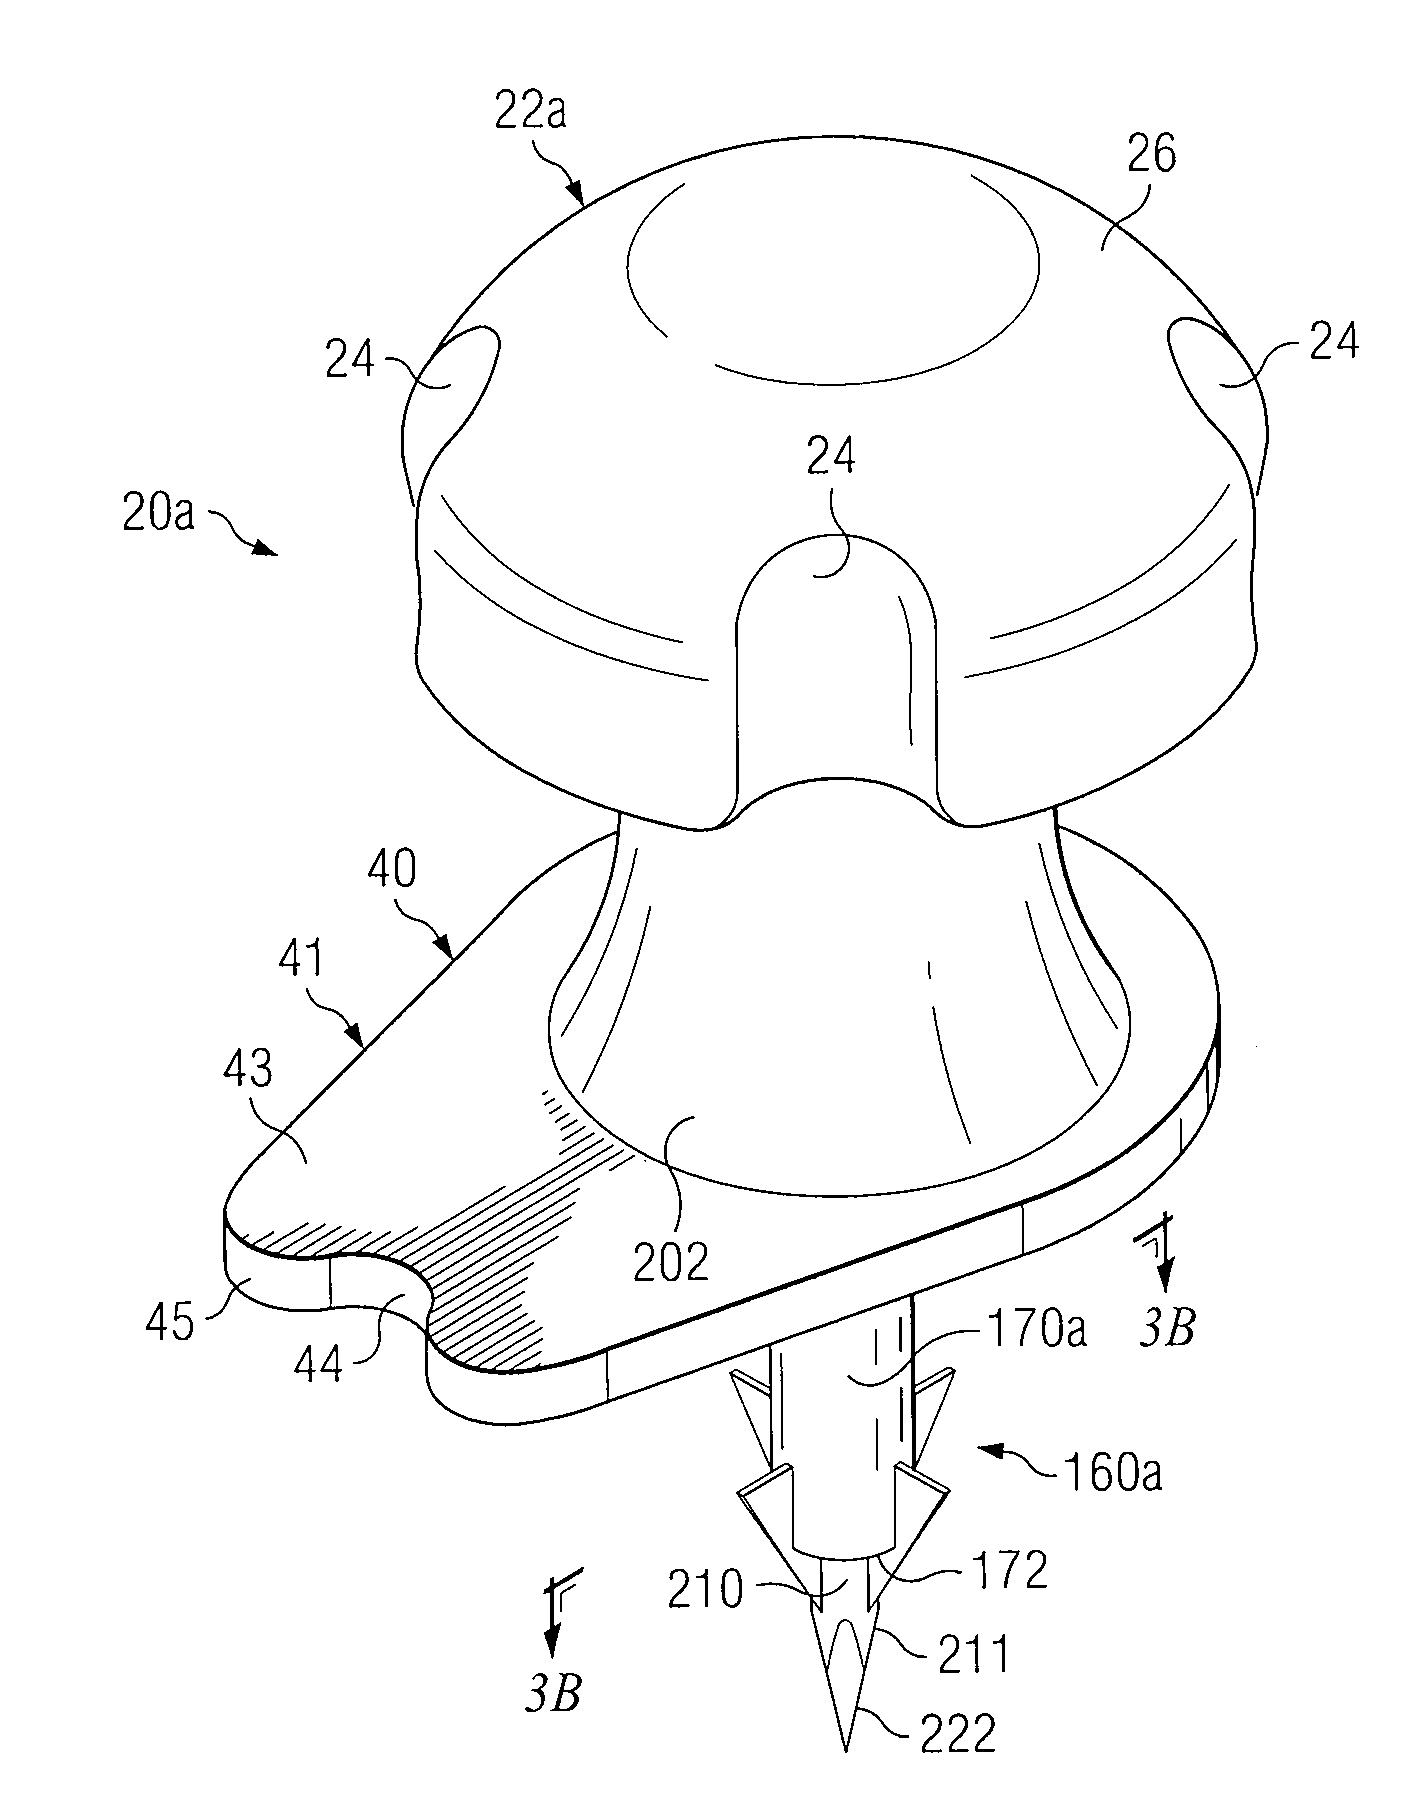 Intraosseous device and methods for accessing bone marrow in the sternum and other target areas